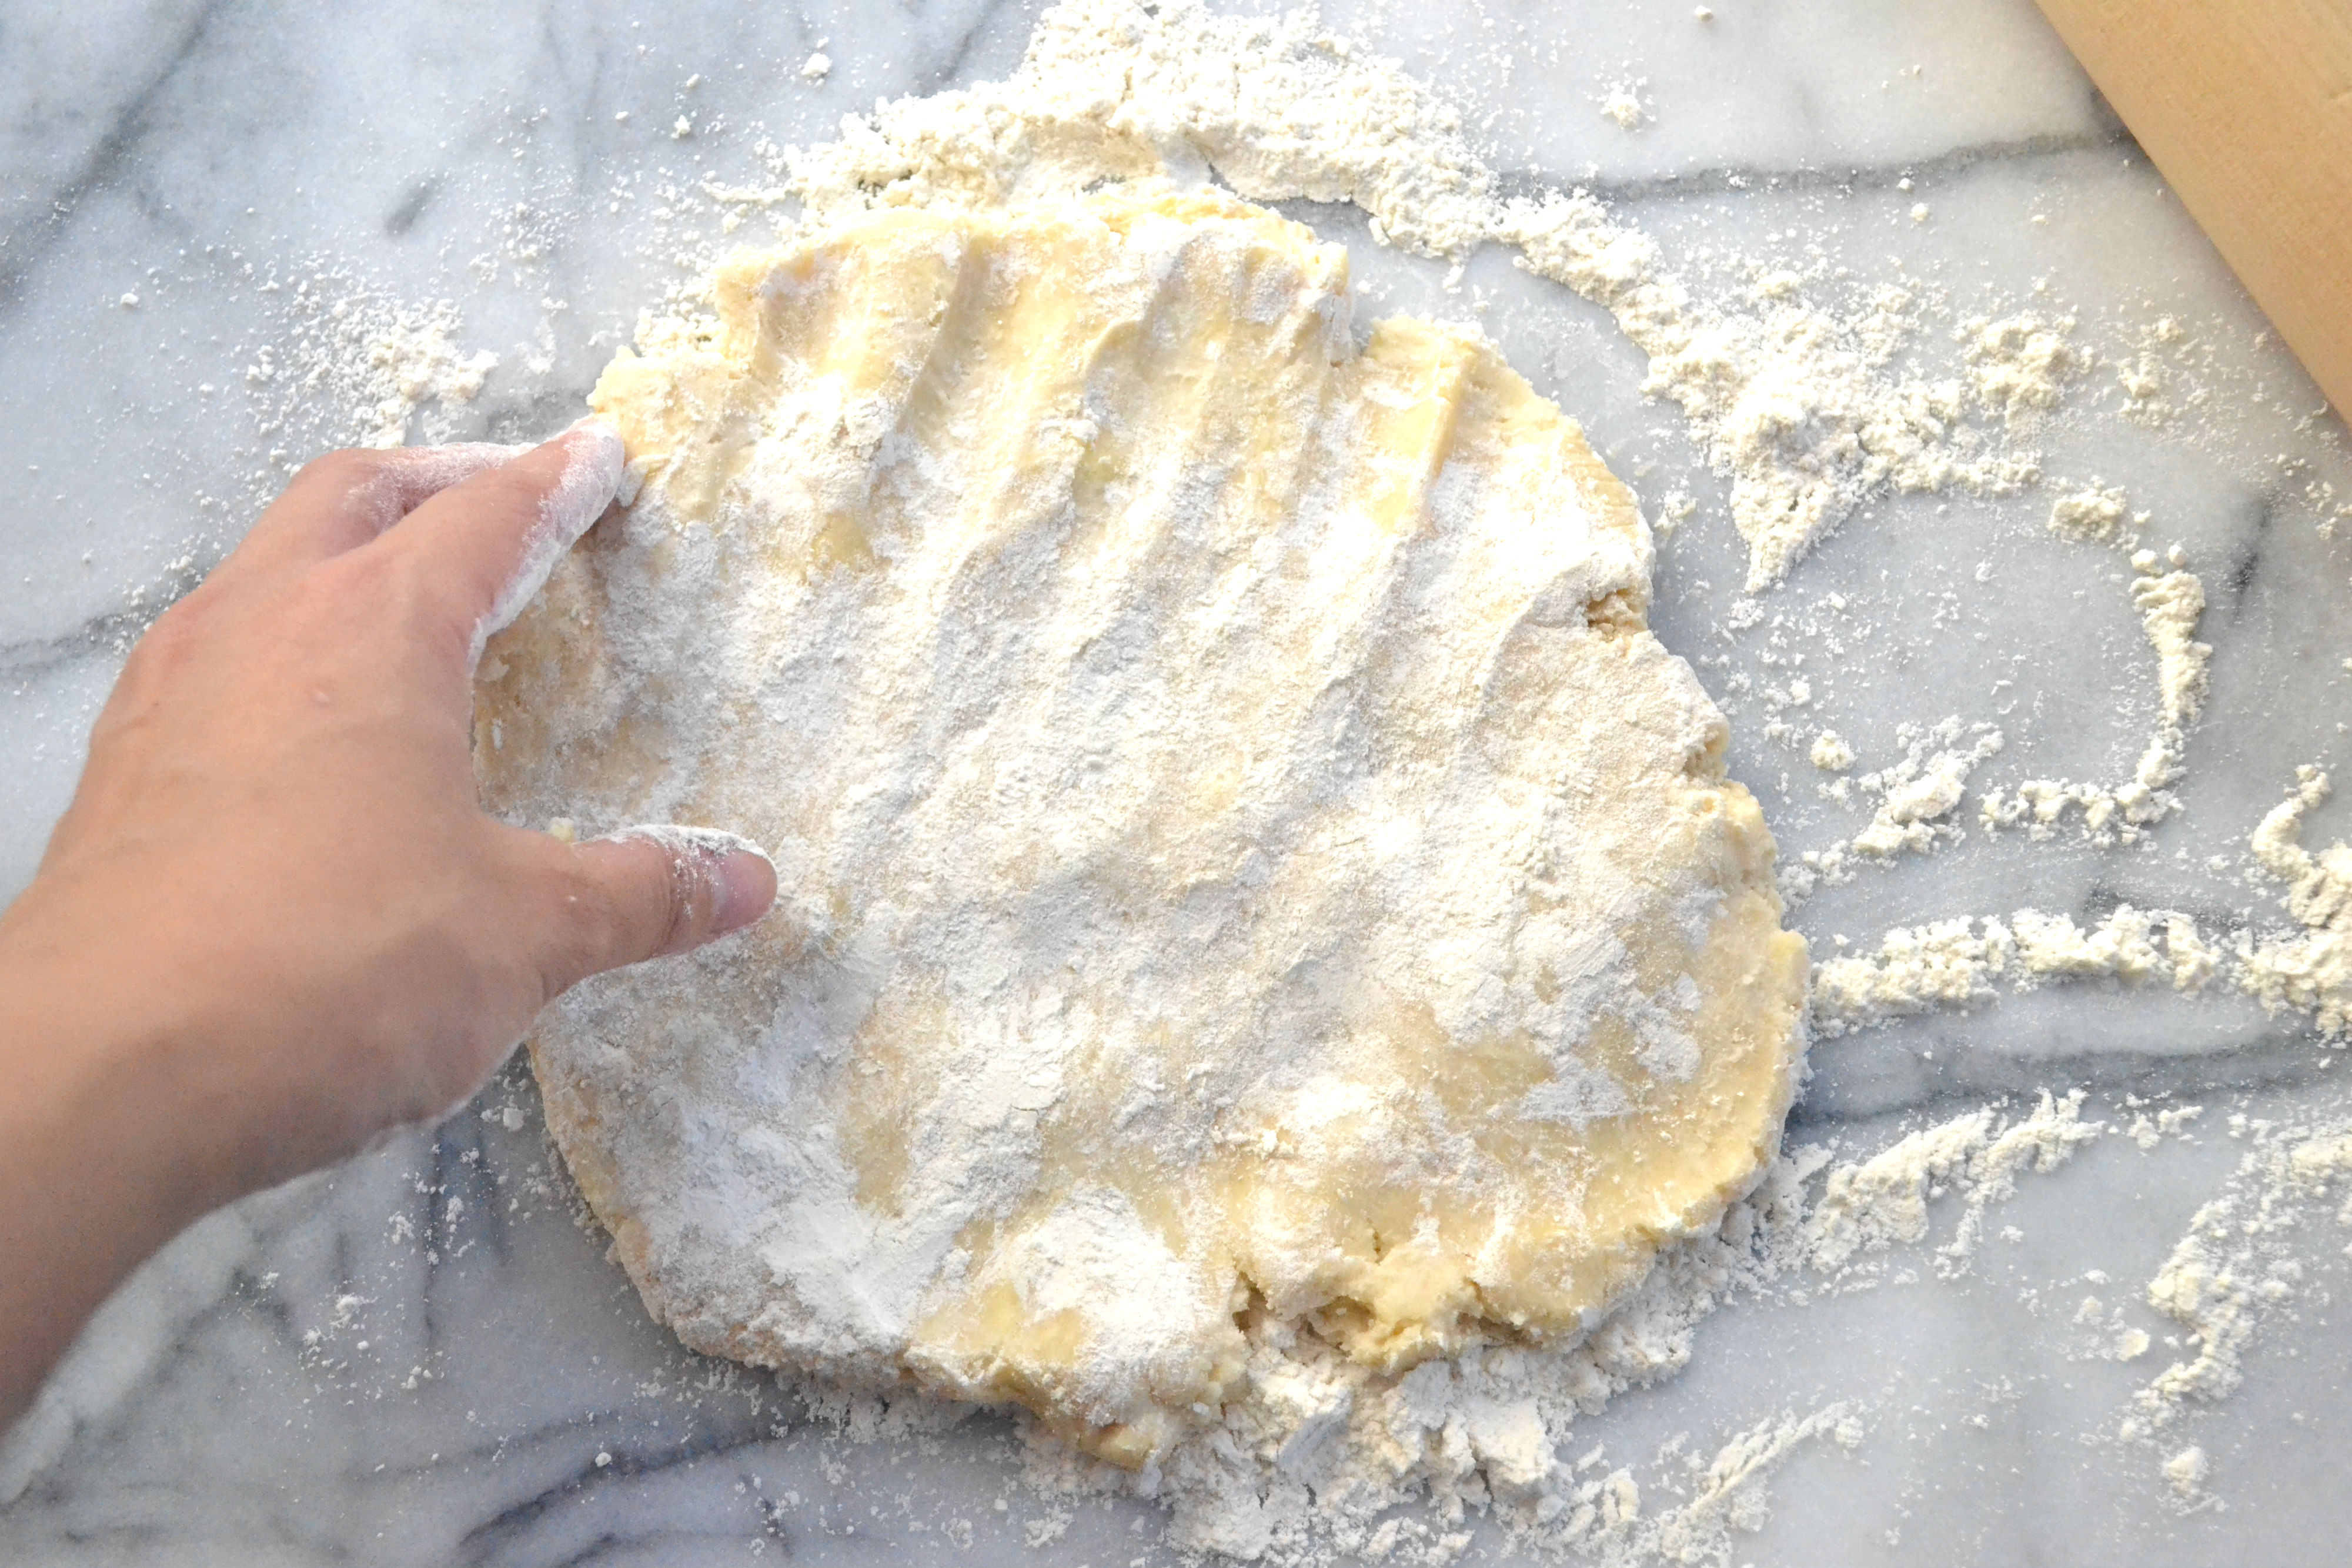 Work the flour into the dough (it will be very sticky).